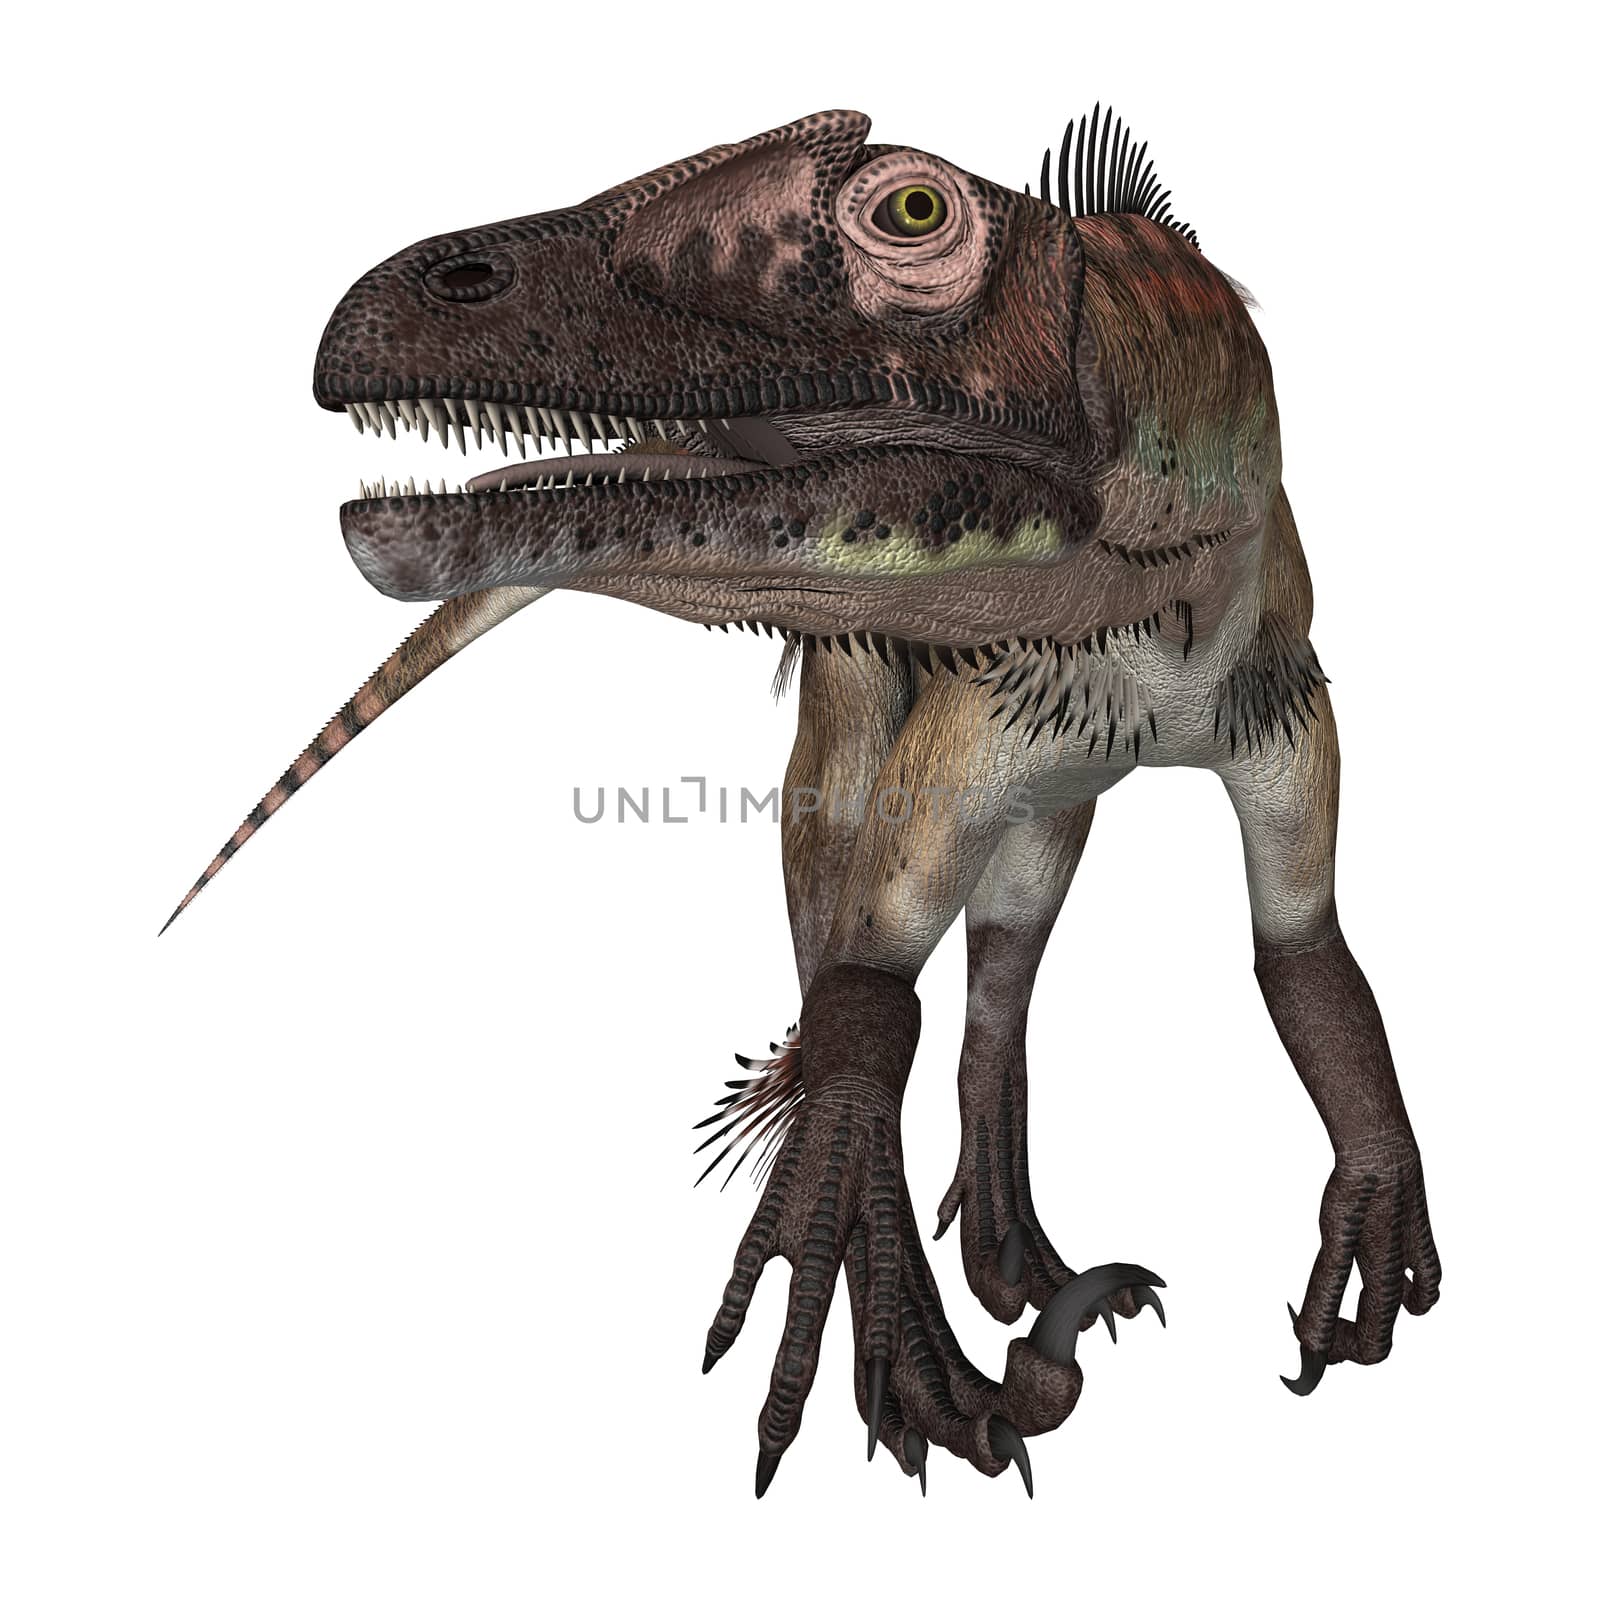 3D digital render of a curious dinosaur utahraptor looking down isolated on white background